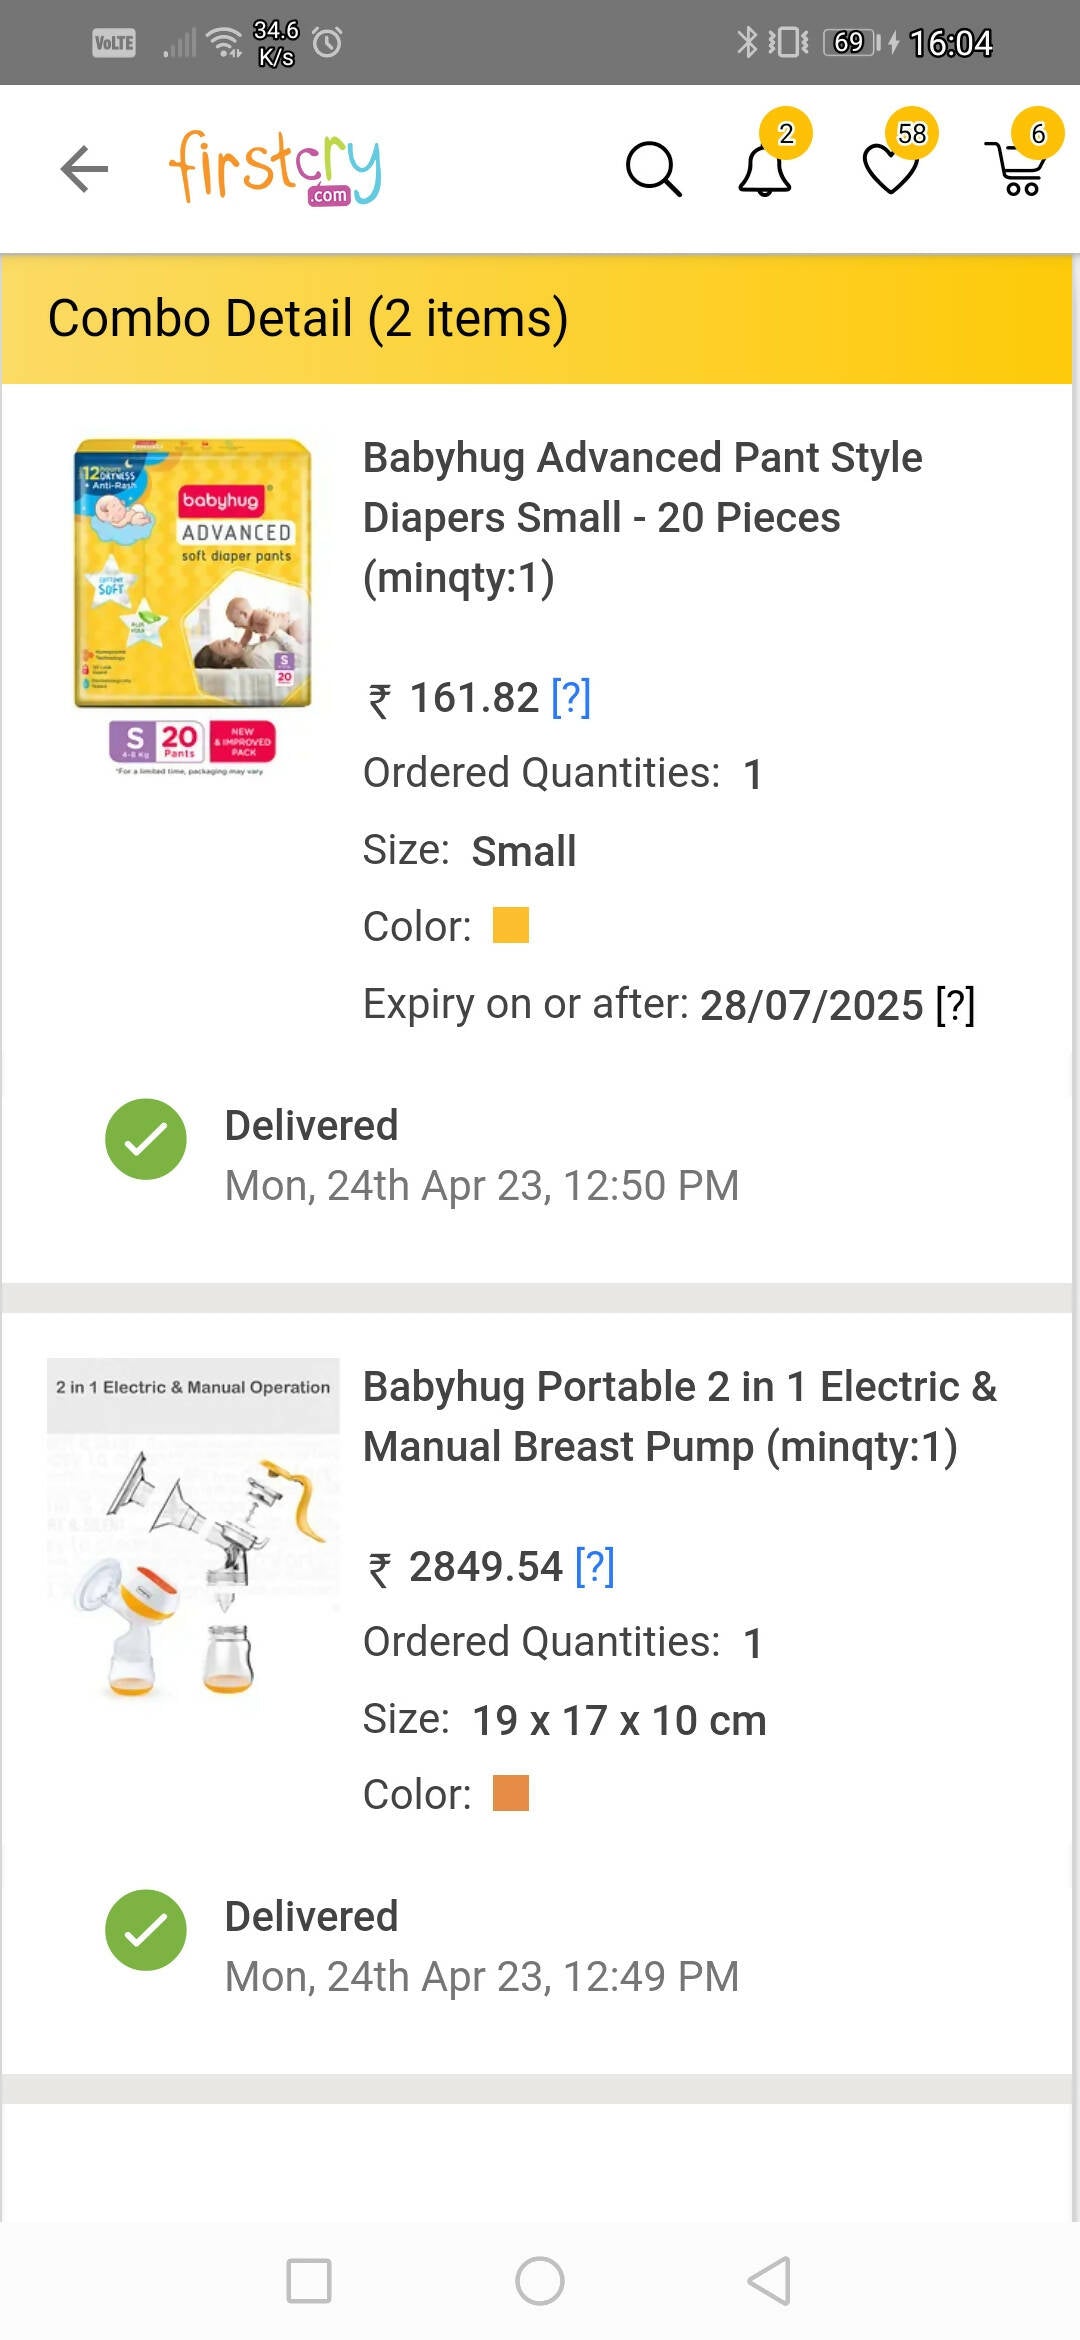 BABYHUG Portable 2 in 1 Electric & Manual Breast Pump - Brand new